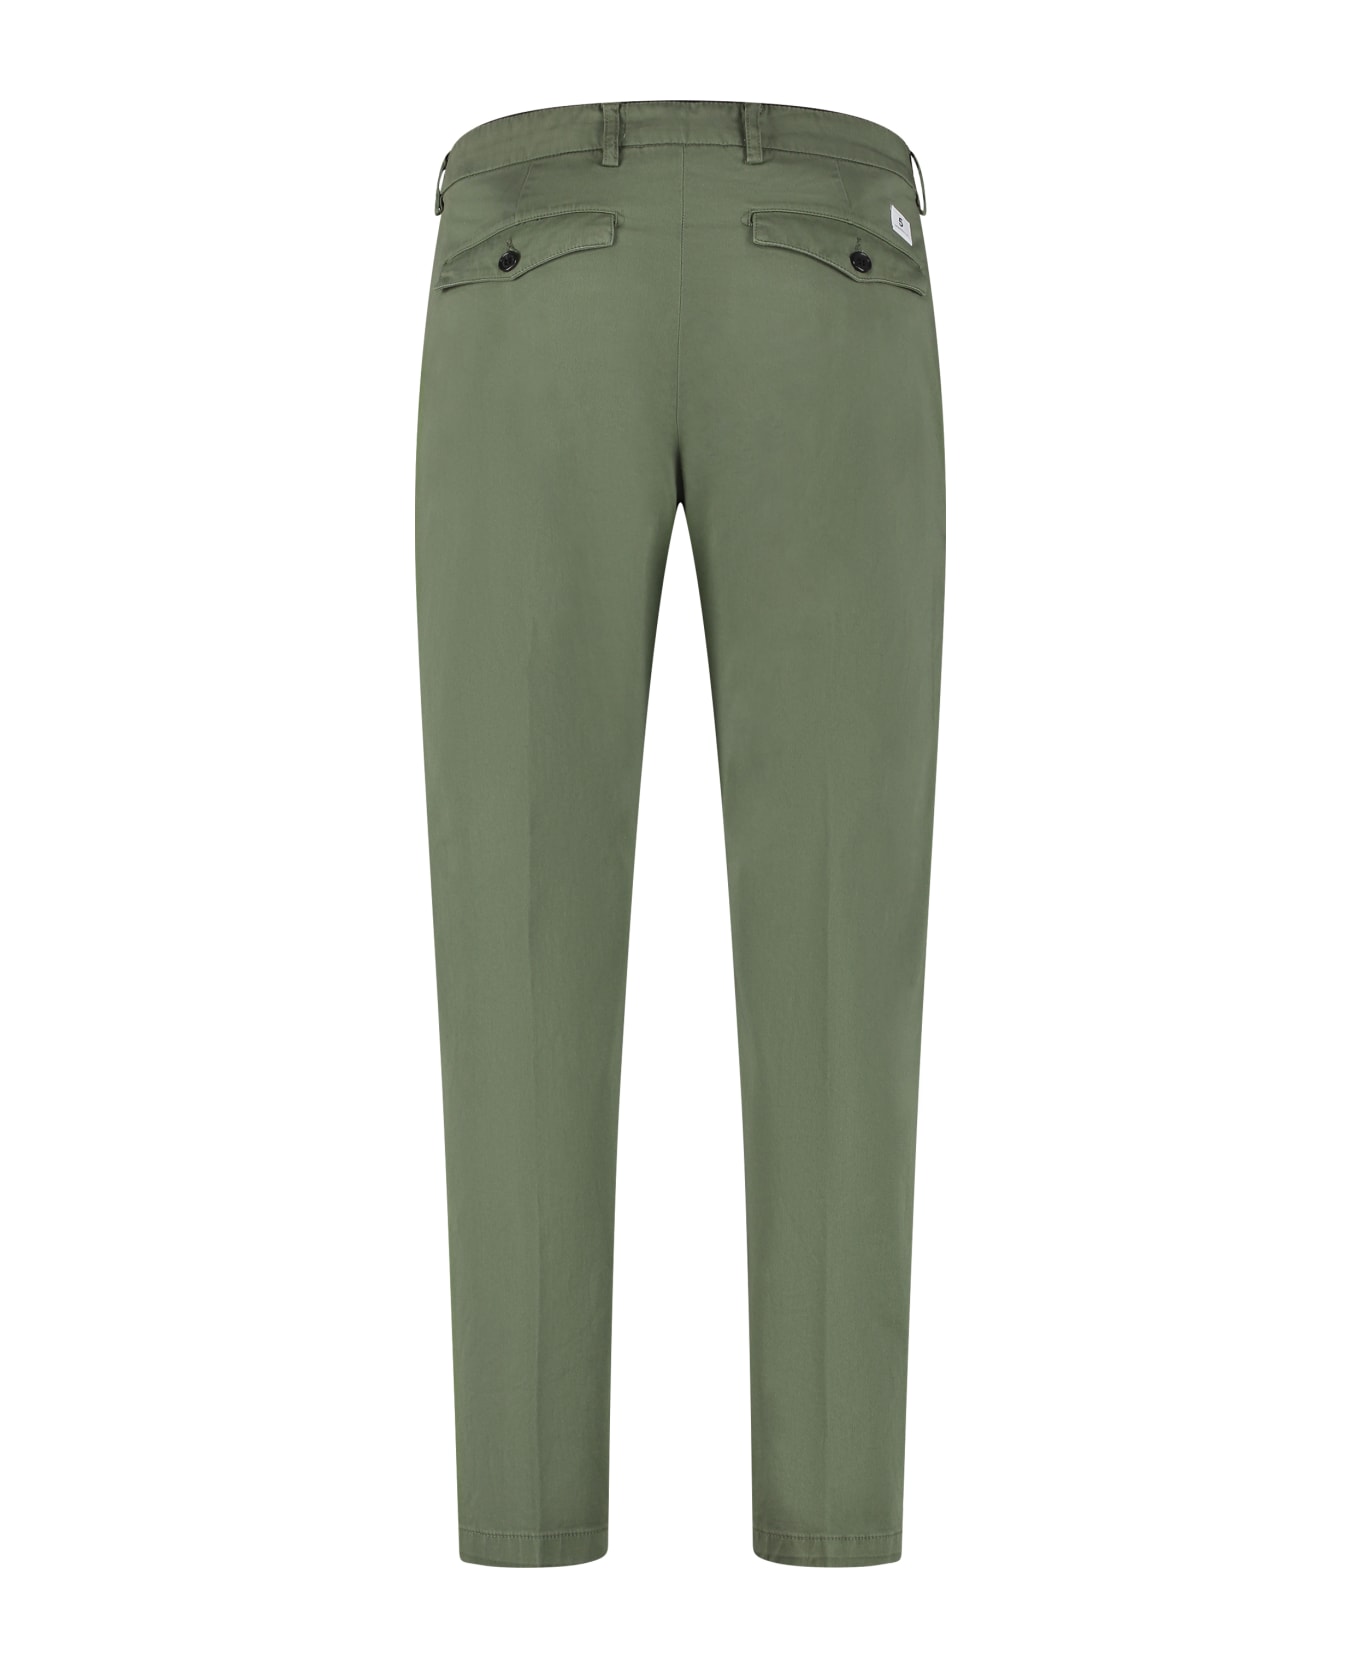 Department Five Prince Chino Pants - green